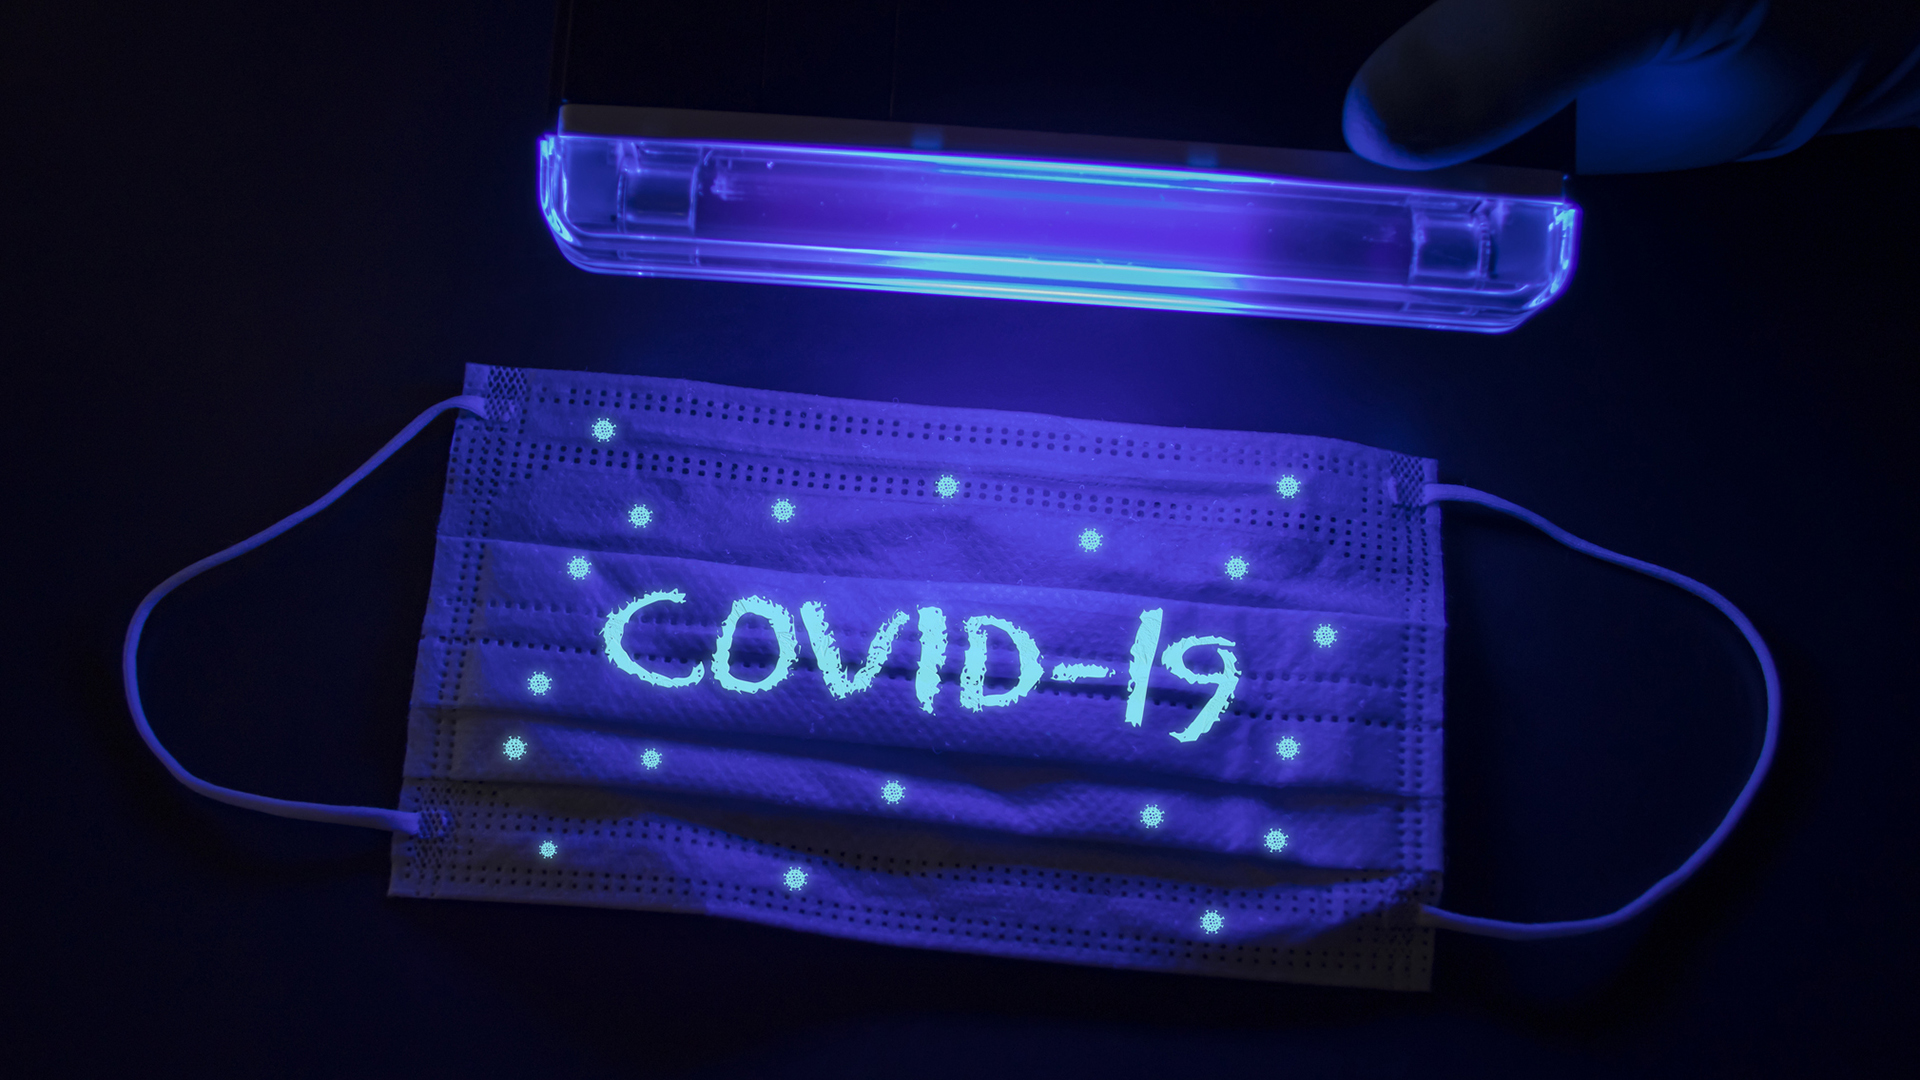 UV lights effectively kill HIV and COVID-19 in 30